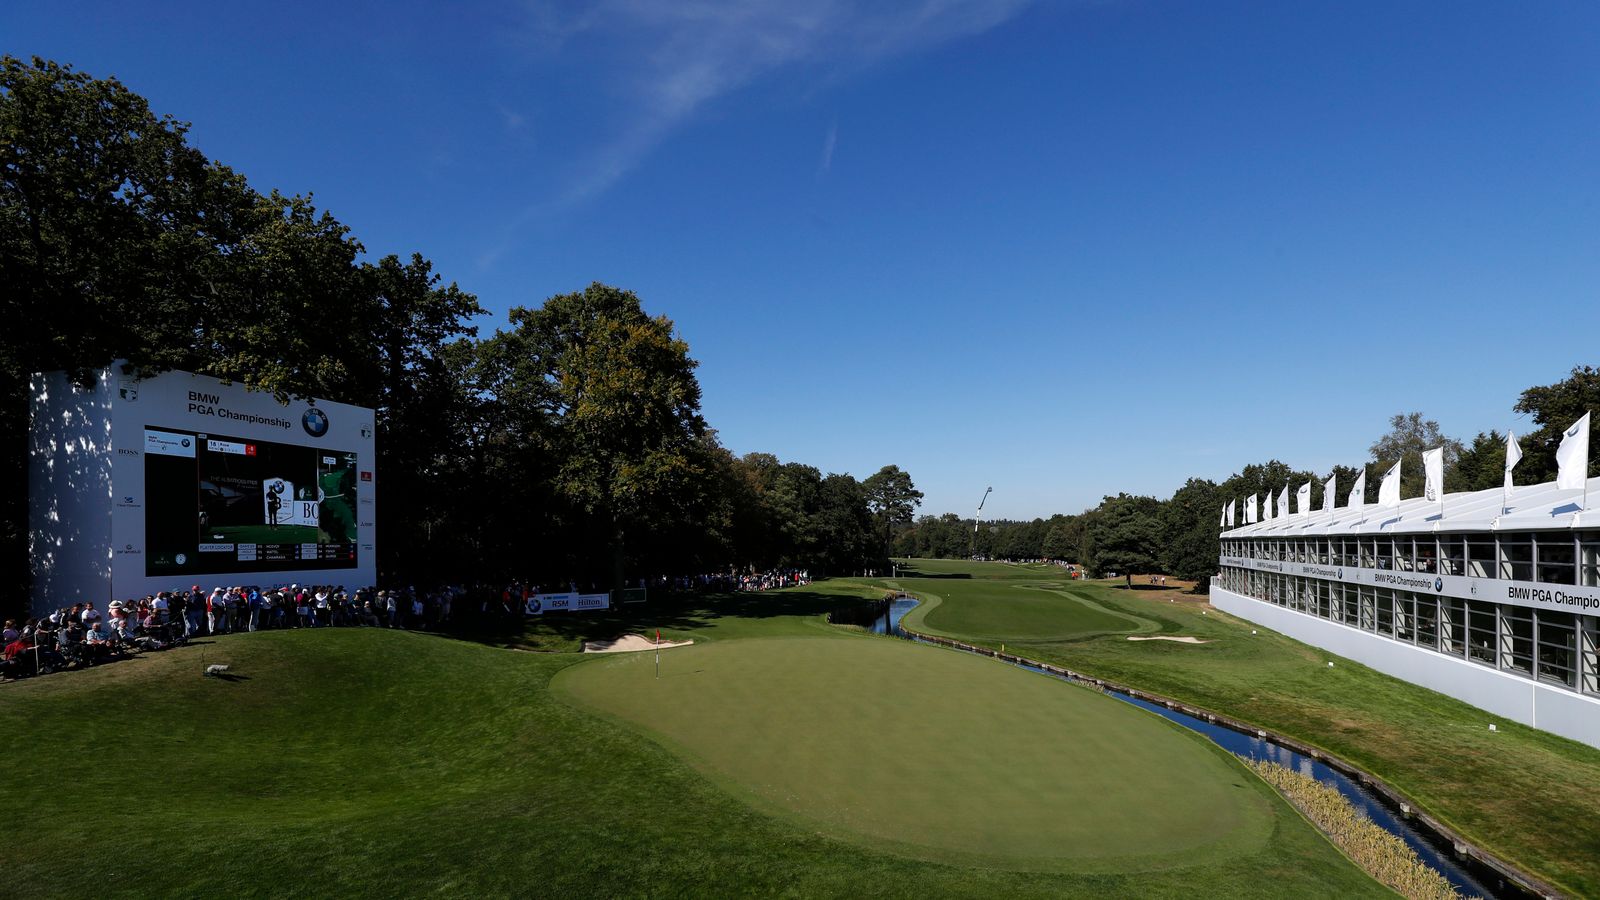 BMW PGA Championship Wentworth earns the plaudits from players Golf